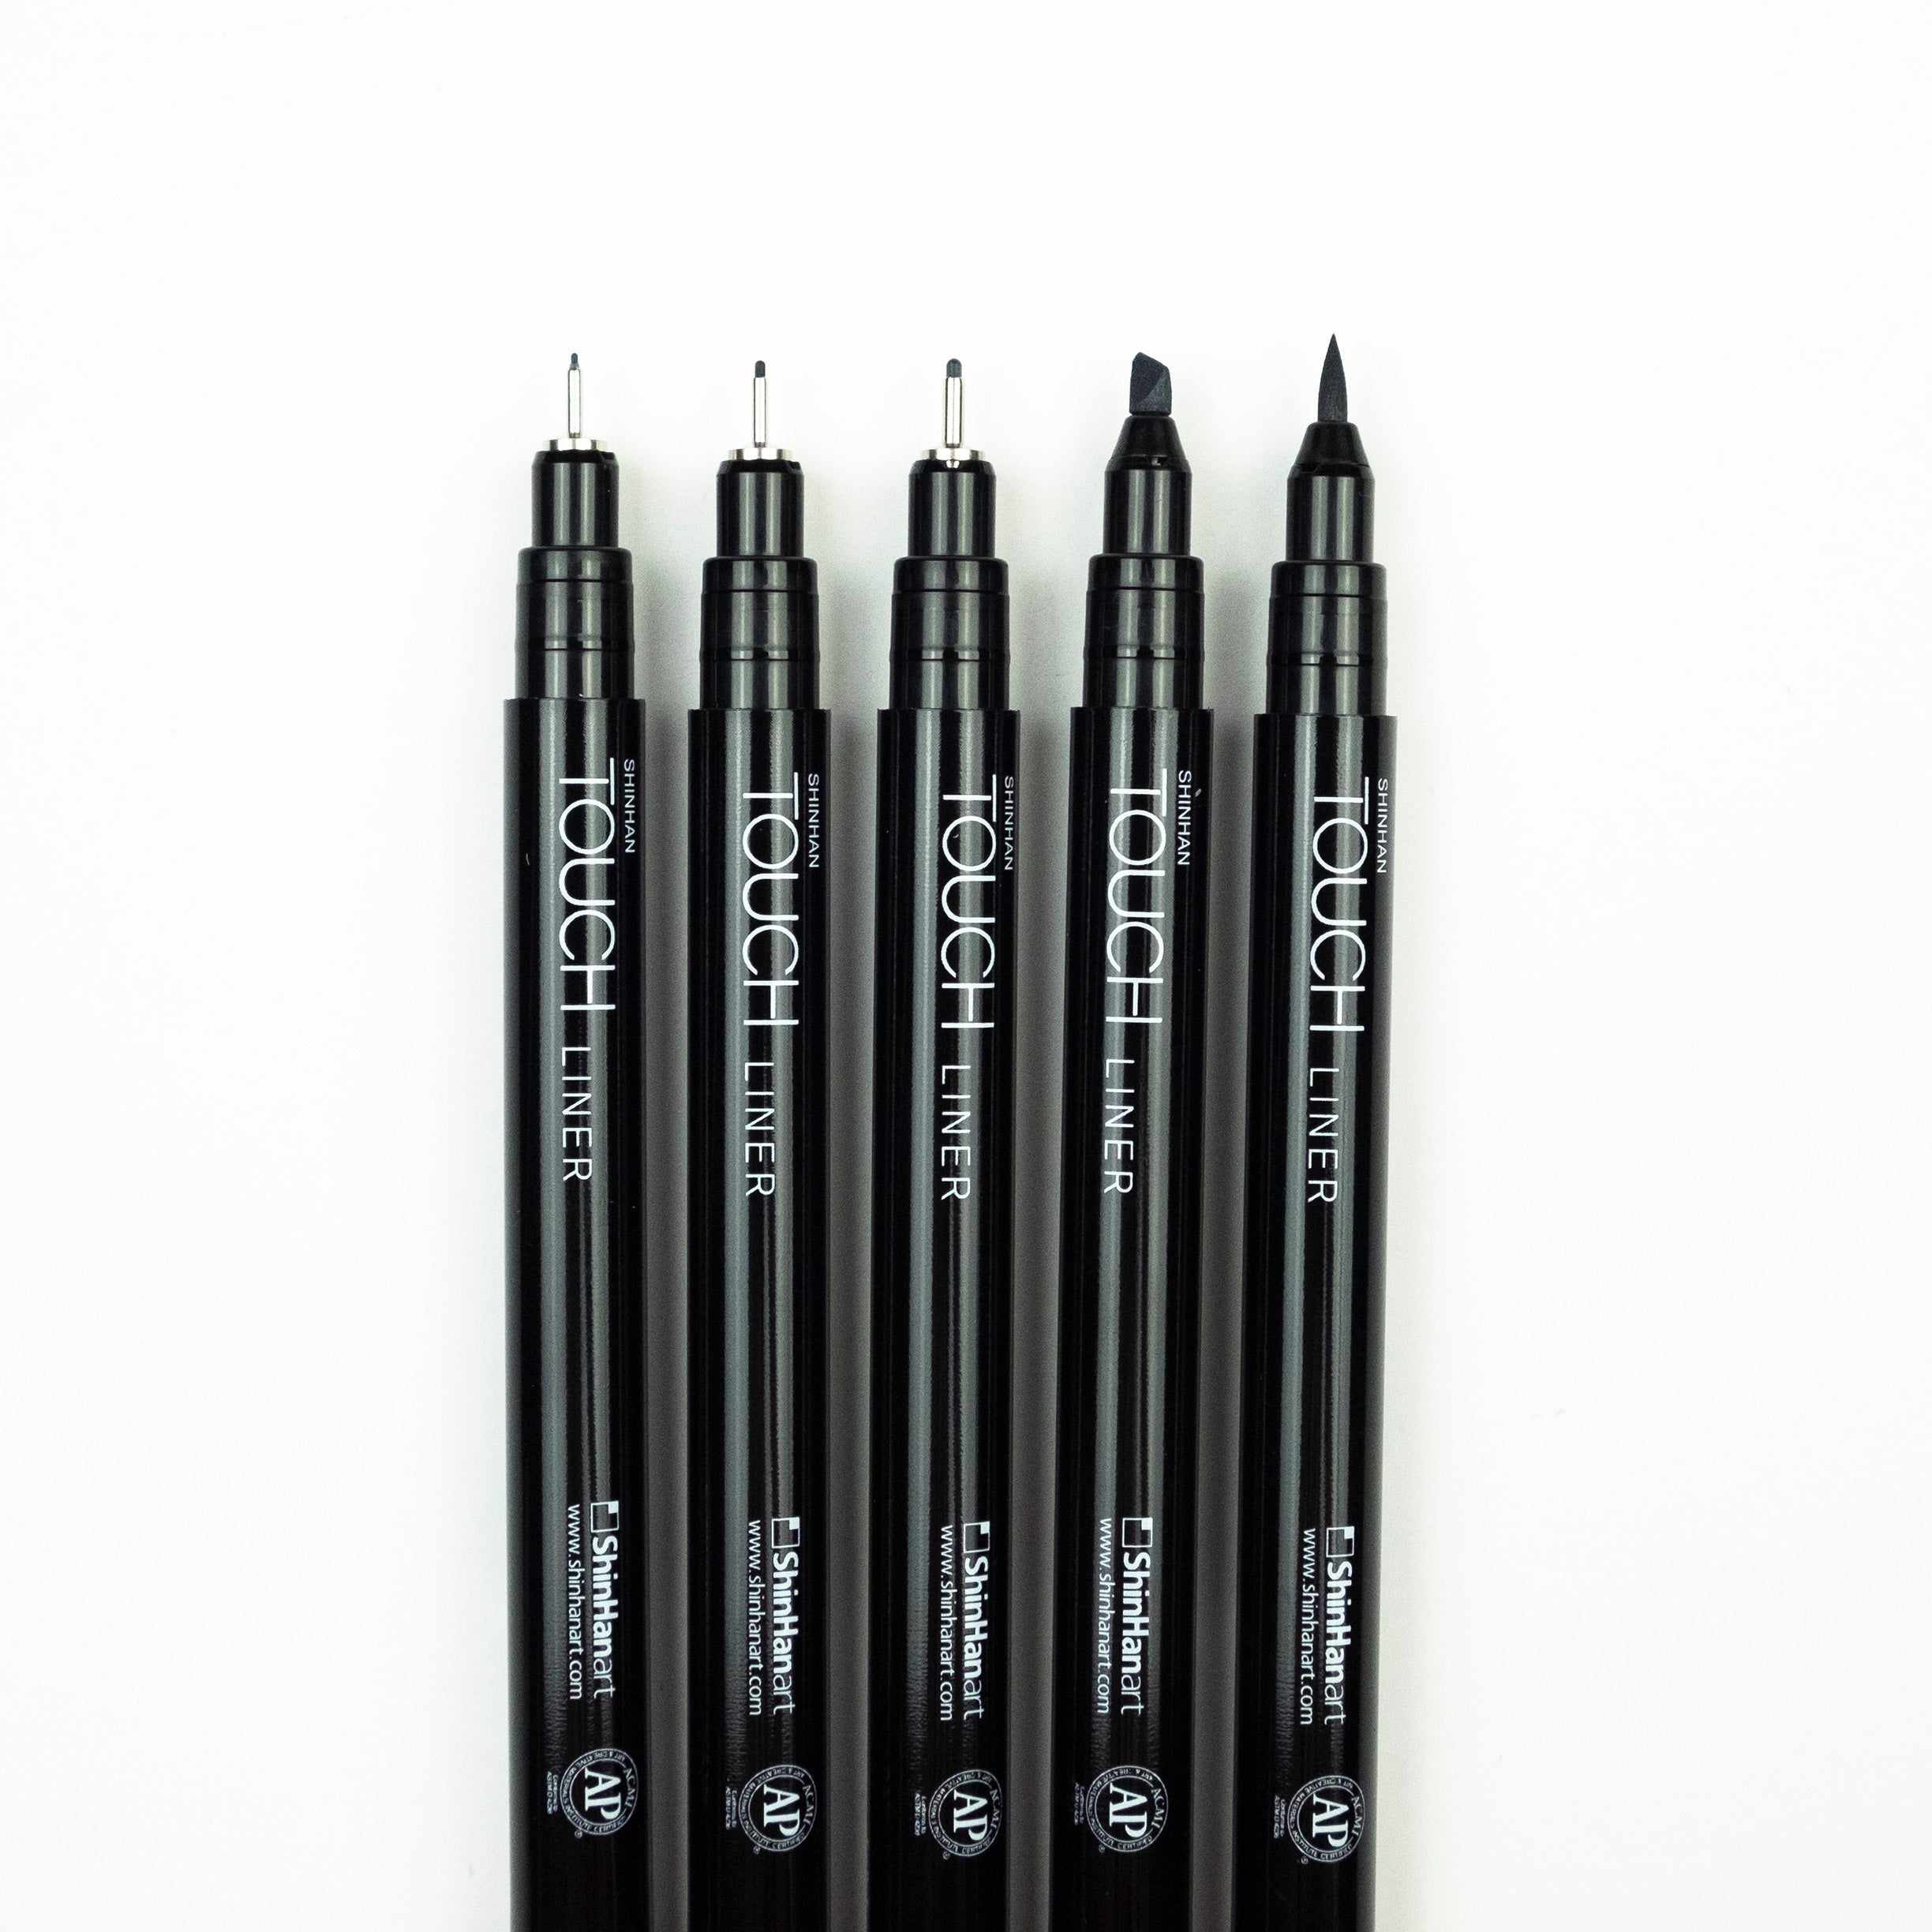 ShinHan Art Touch Liners, Cool Grey Set of 5